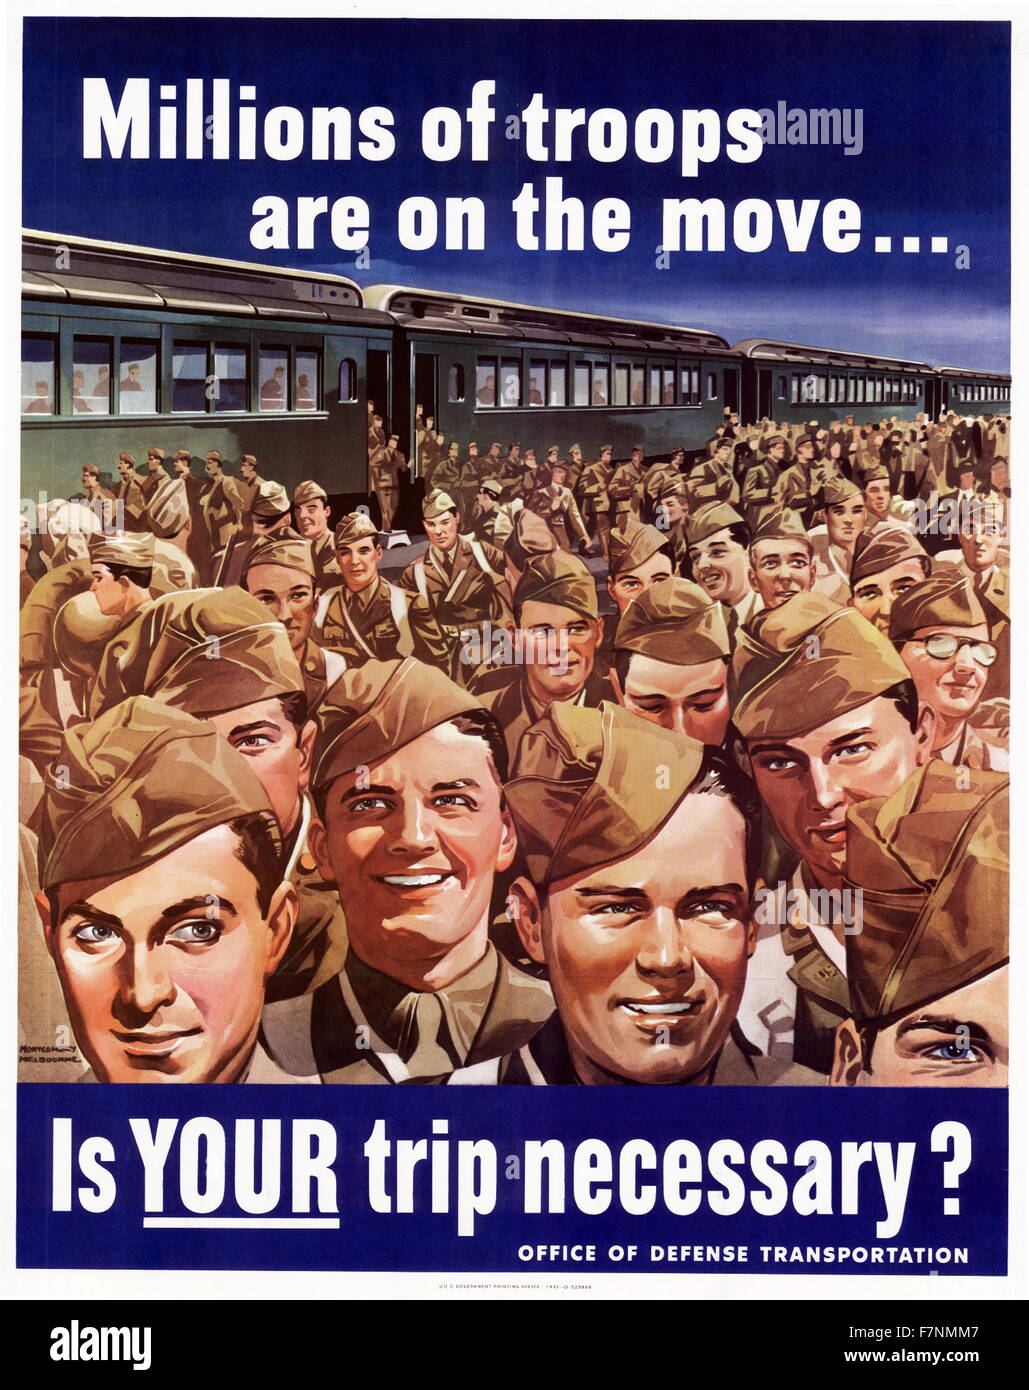 World War Two, American Patriotic Poster. Stock Photo